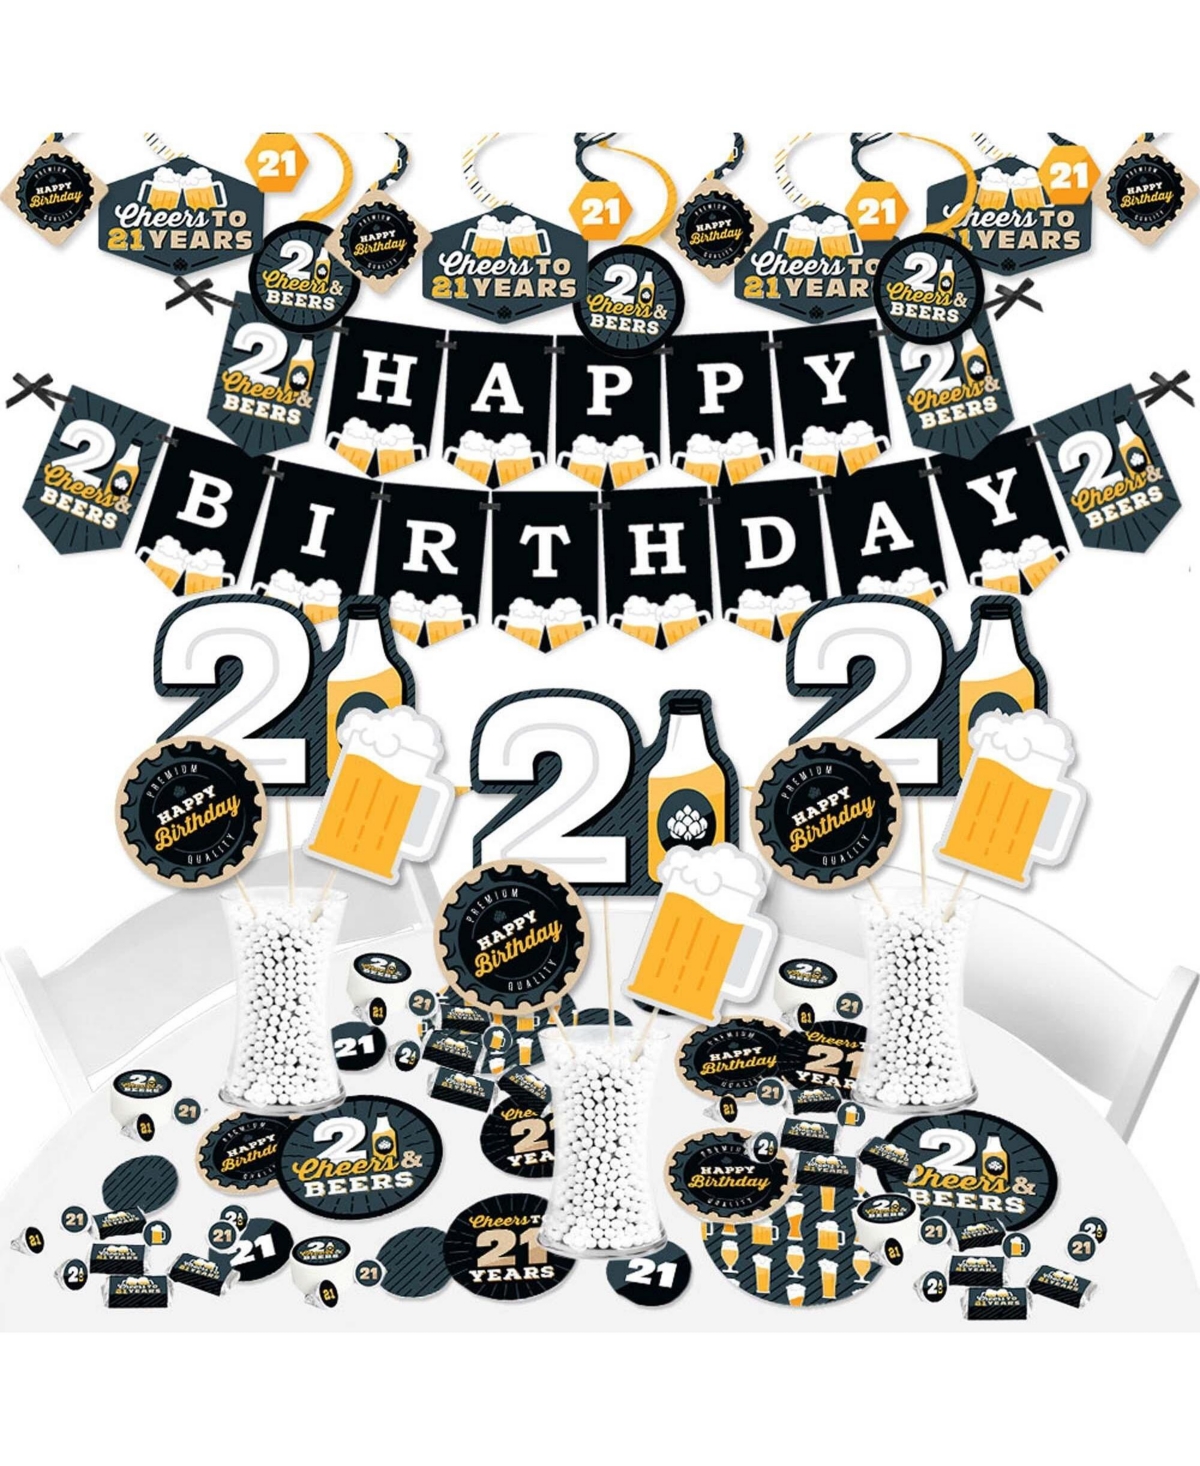 Big Dot of Happiness Cheers and Beers to 21 Years - 21st Birthday Party Supplies - Banner Decoration Kit - Fundle Bundle